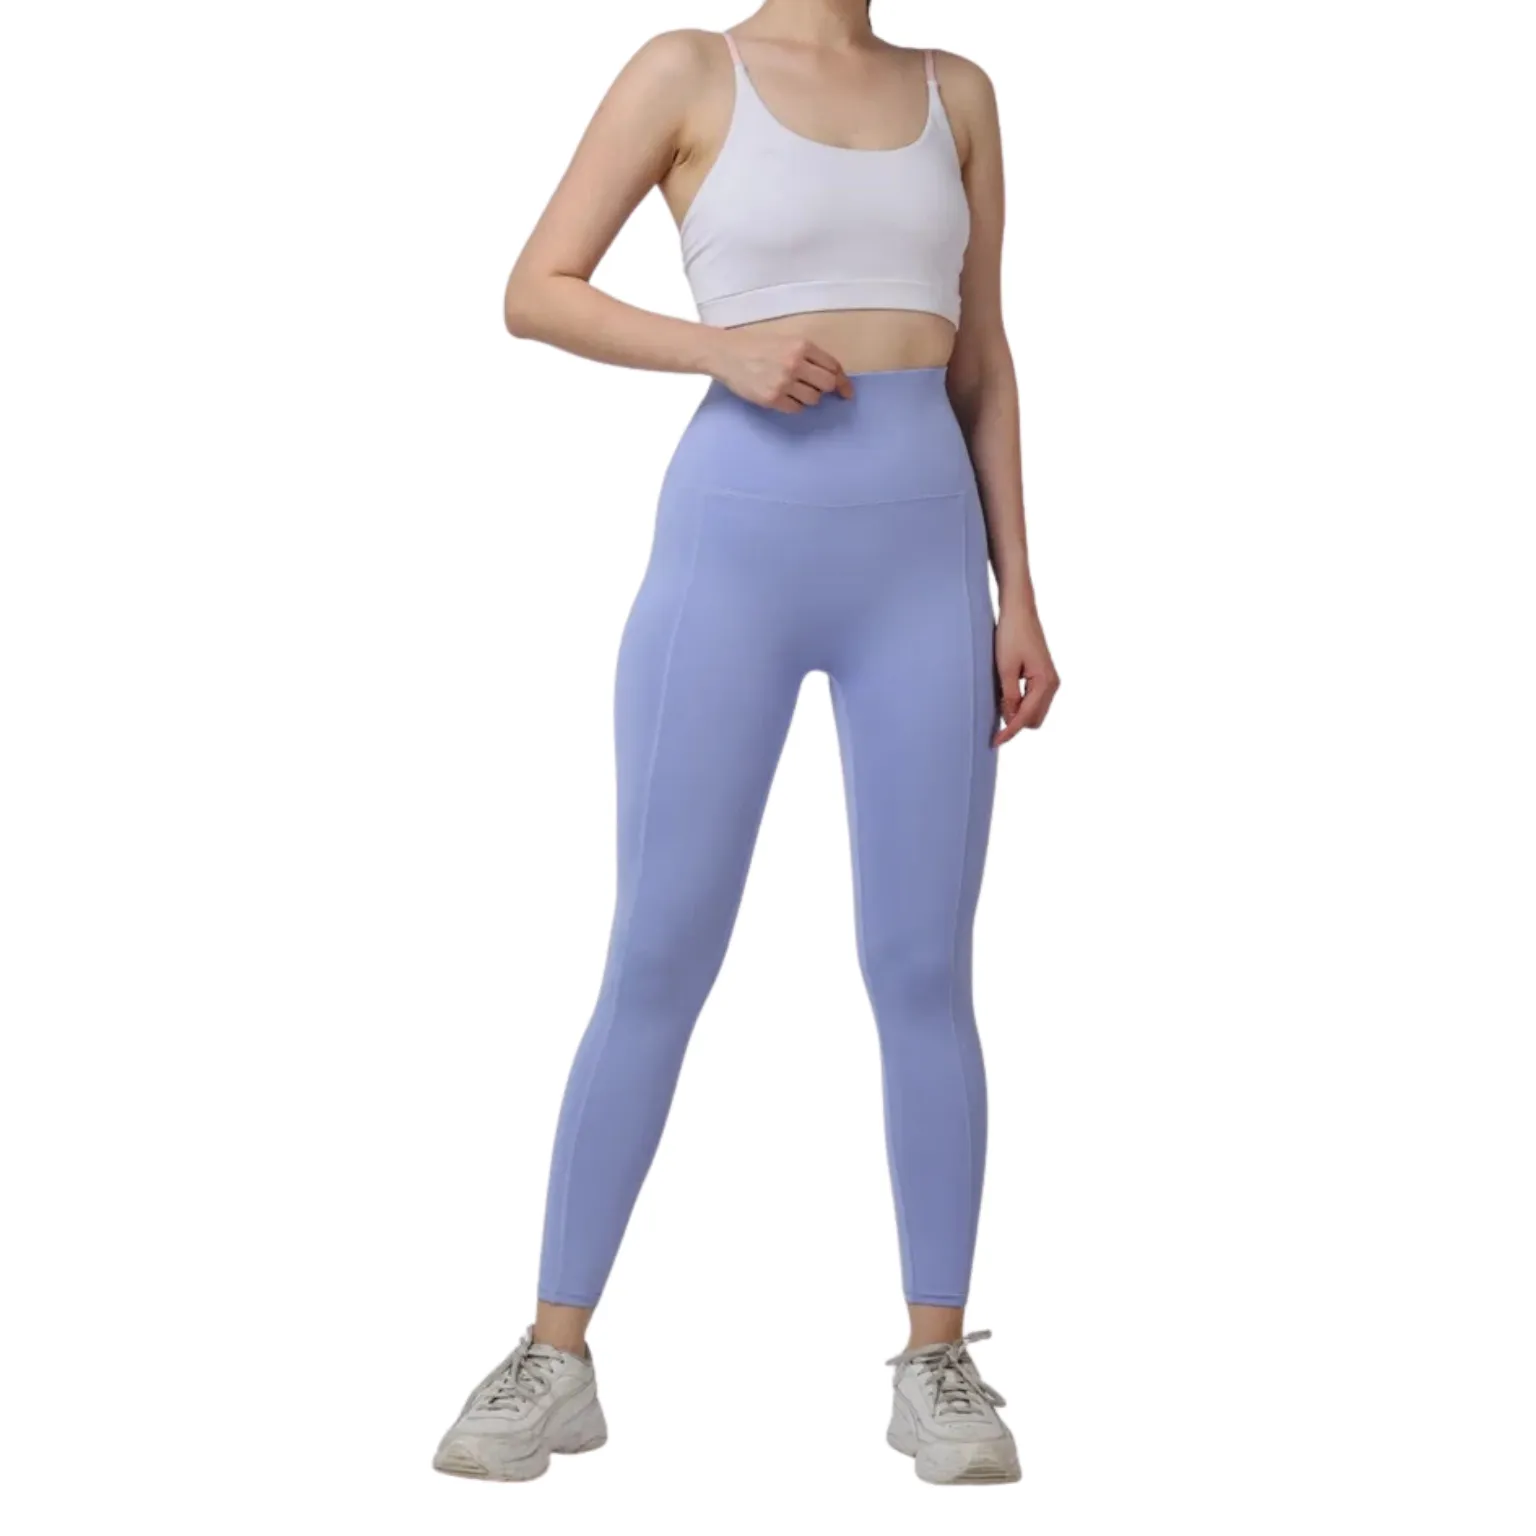 High stretch leggings manufacturing with trendy design